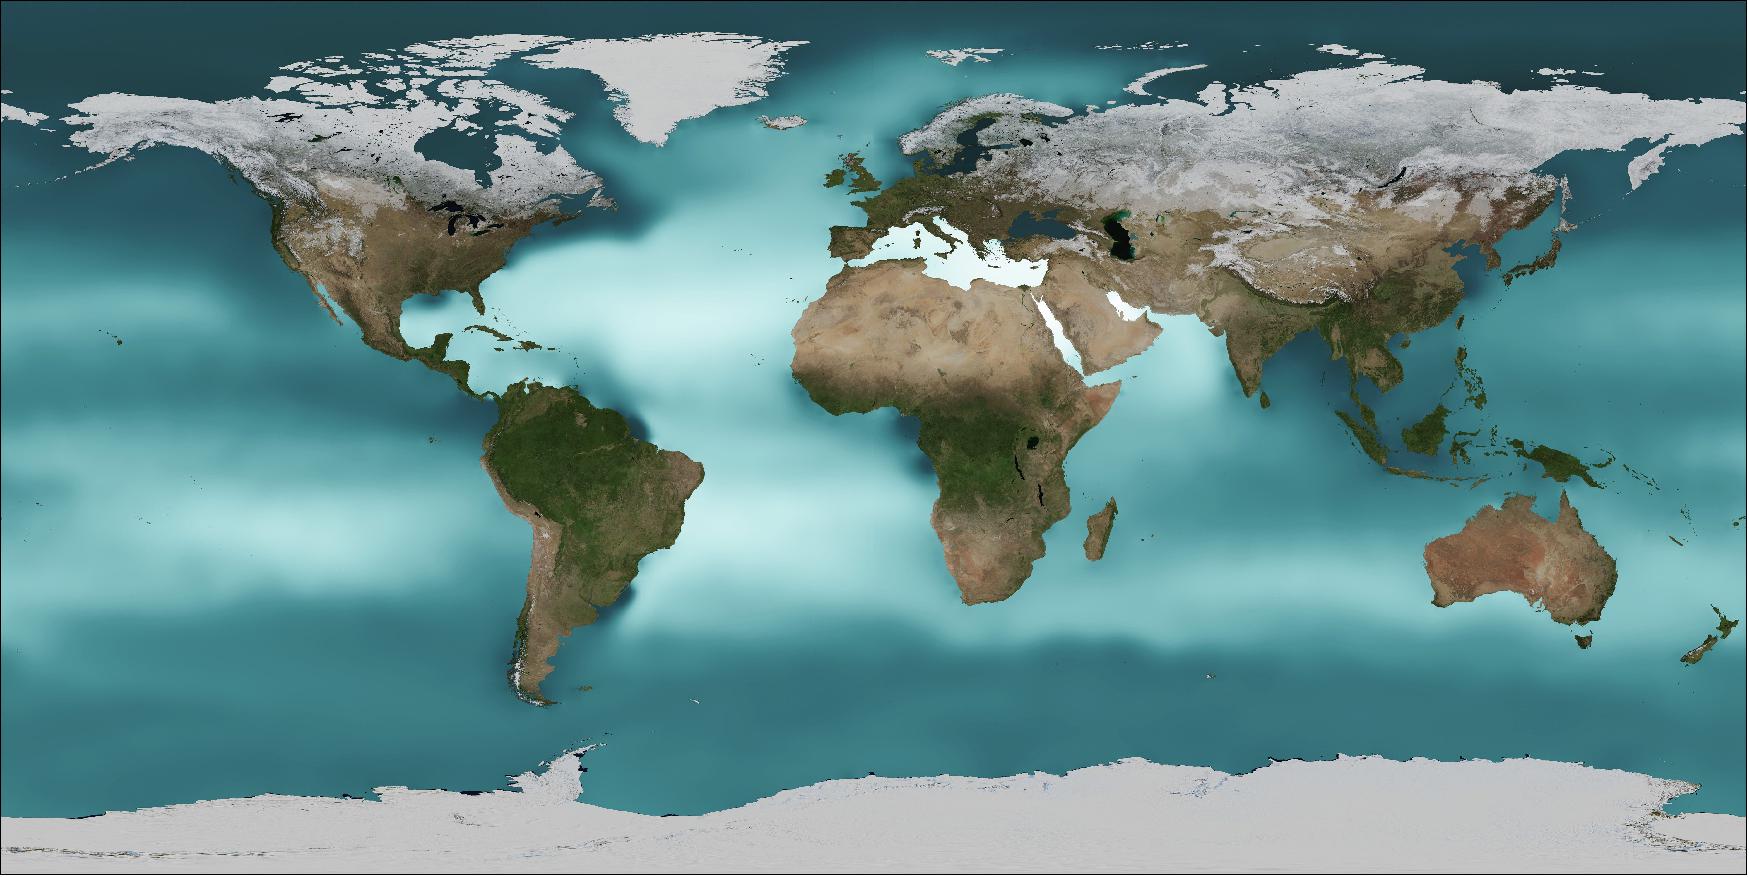 Figure 90: Ocean surface salinity plays an important role in ocean currents, evaporation and interaction with the atmosphere, and heat transfer from the tropics to the poles. Colder, saltier water is denser and heavier than warmer, fresher water (image credit: NASA)